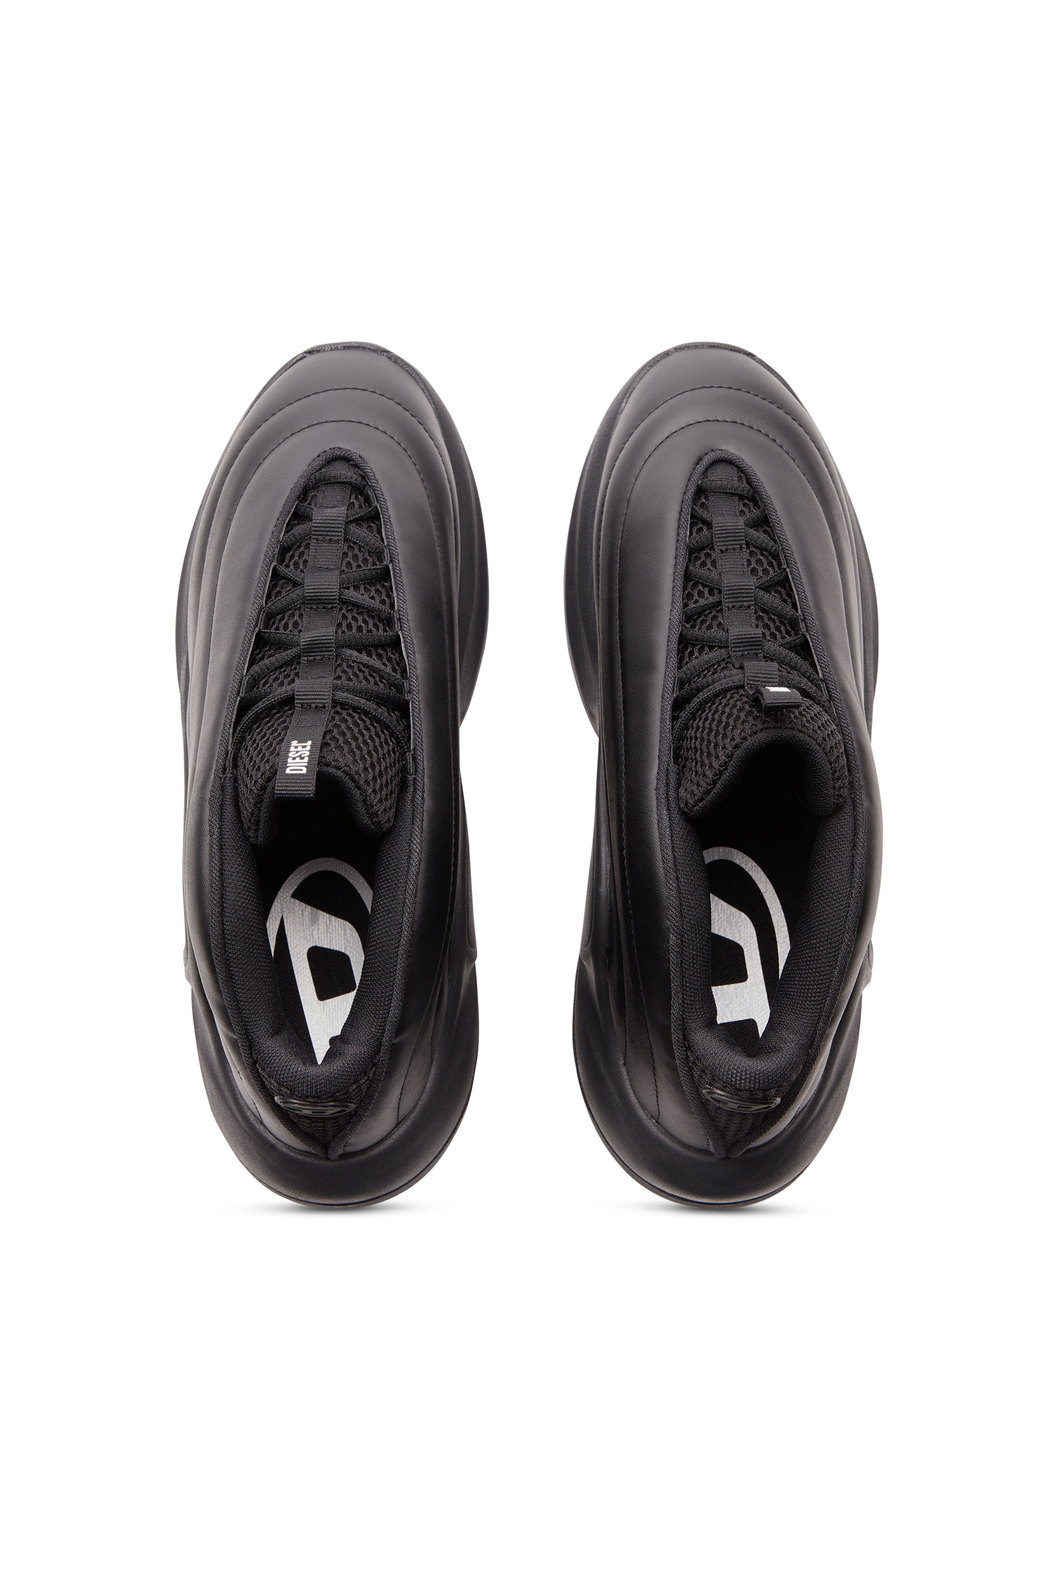 S-D-Runner X - Slip-on sneakers with matte Oval D instep